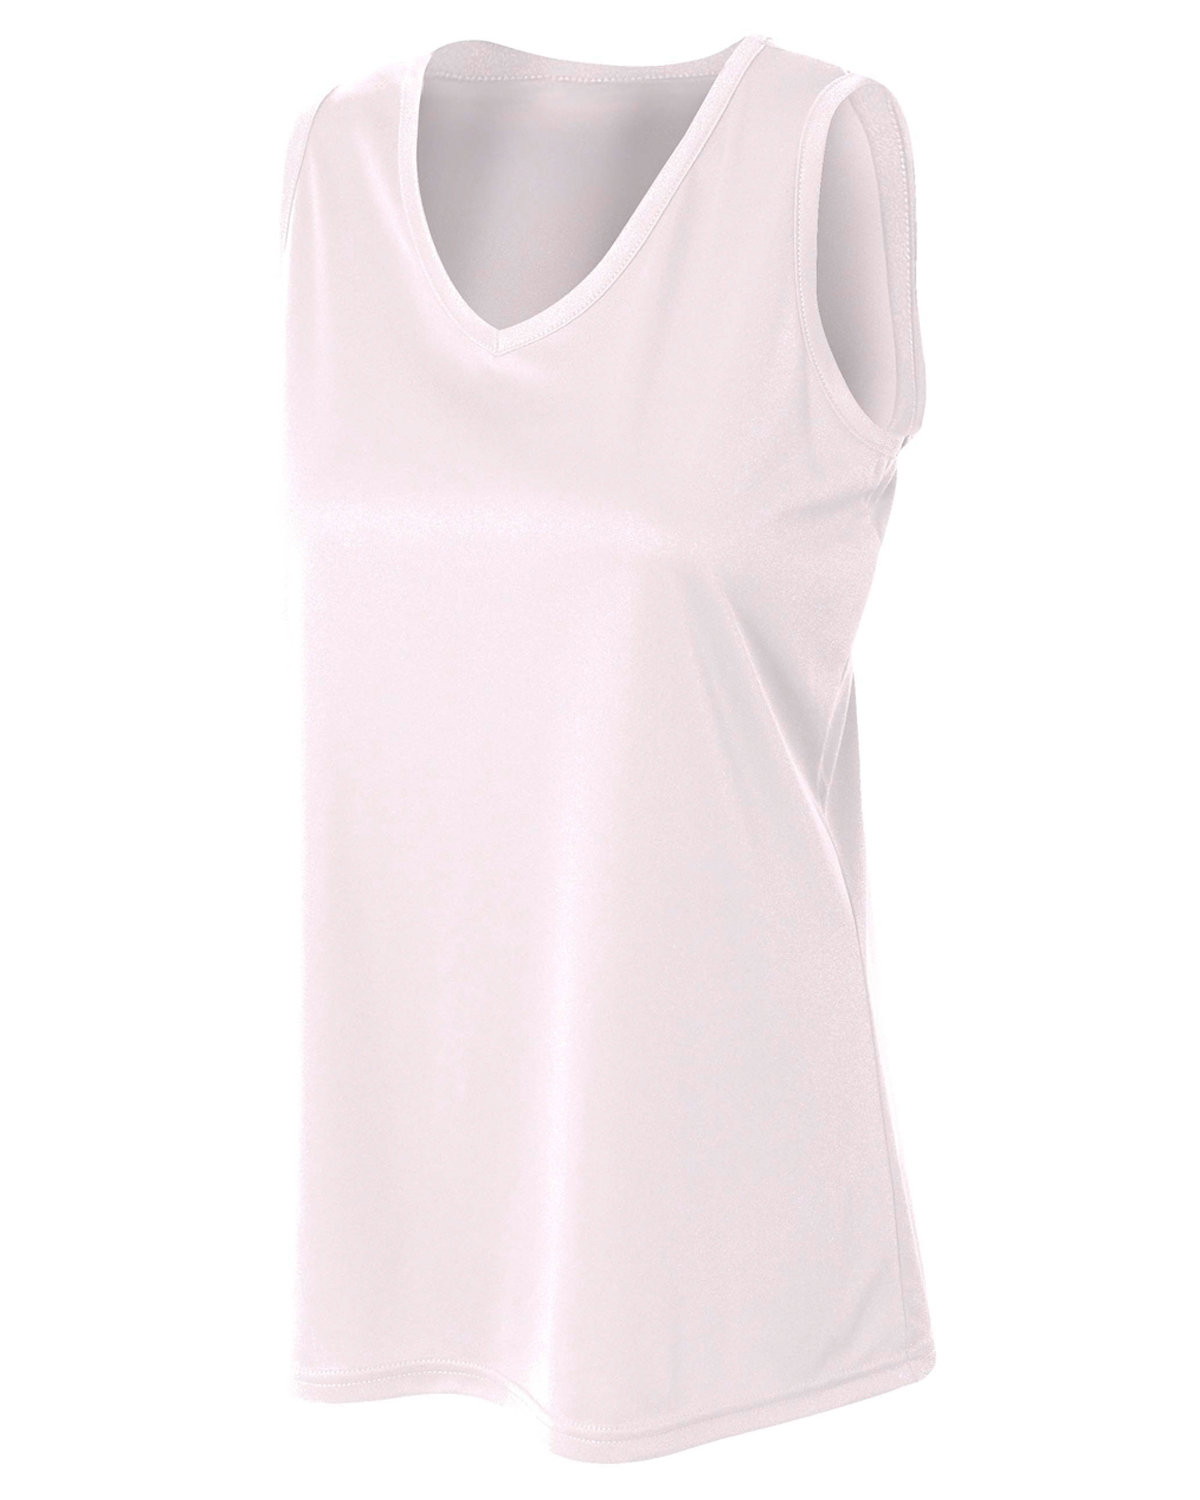 Front view of Ladies’ Athletic Tank Top